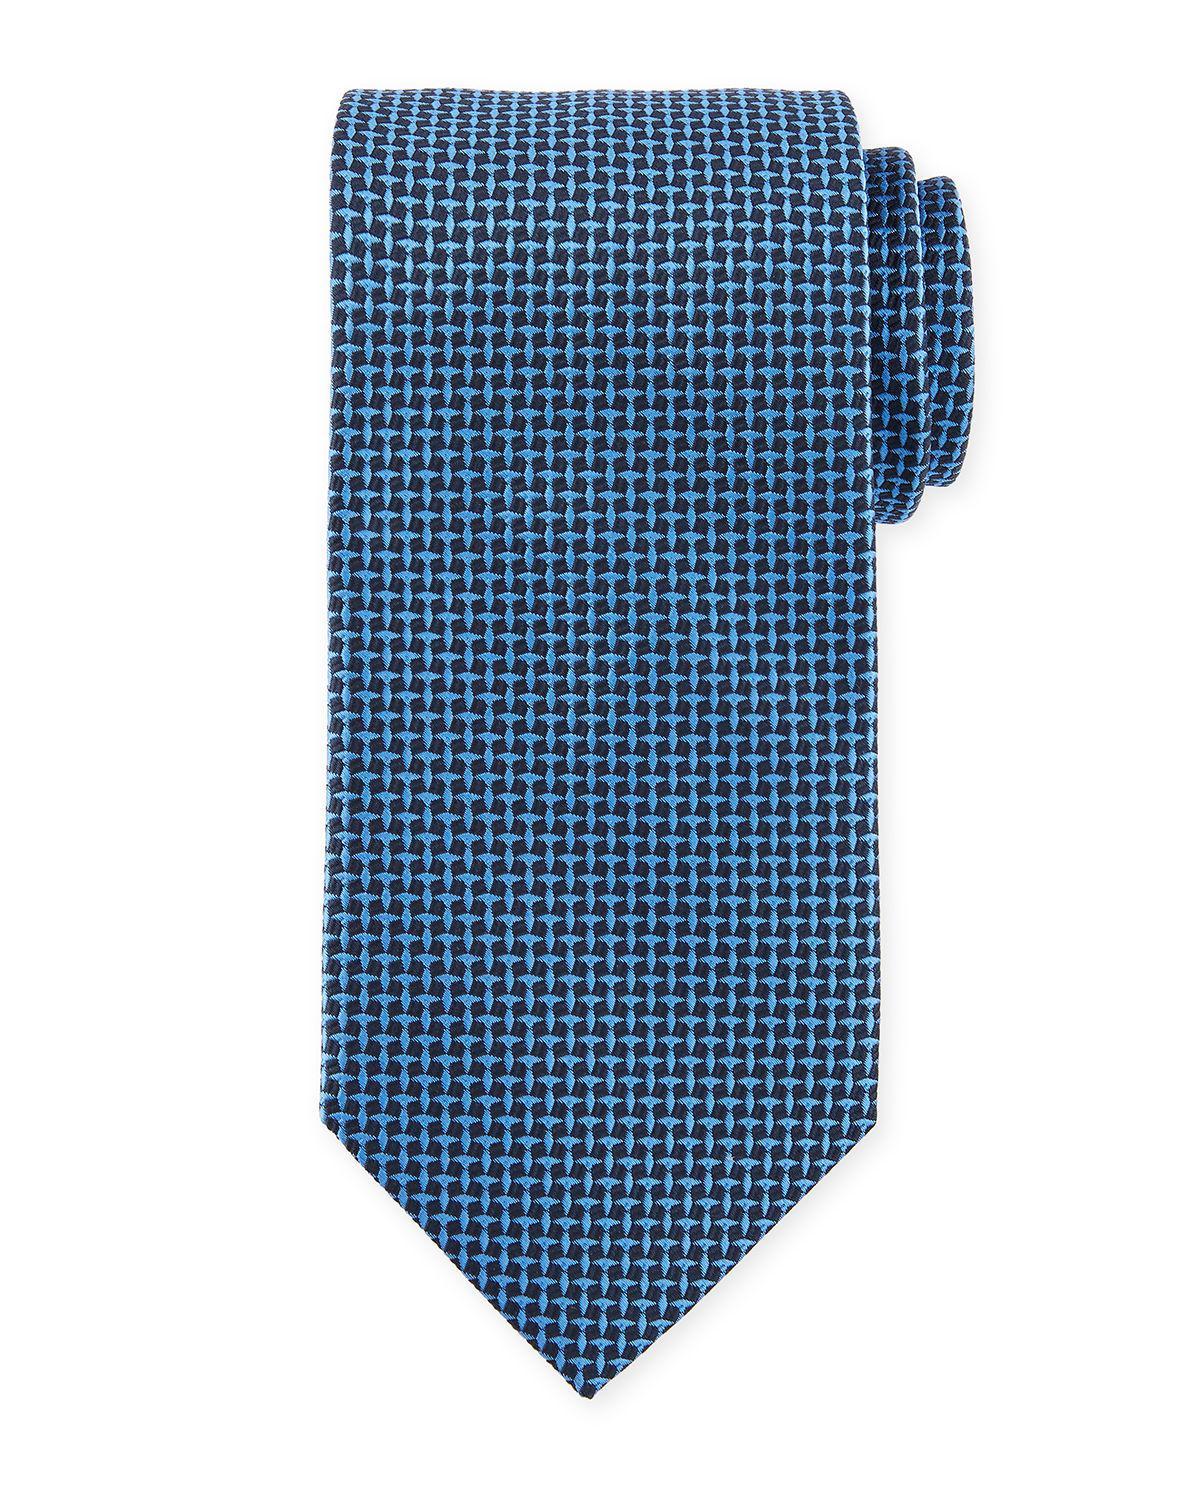 Blue Tilted Square Logo - Lyst Tilted Square Silk Tie in Blue